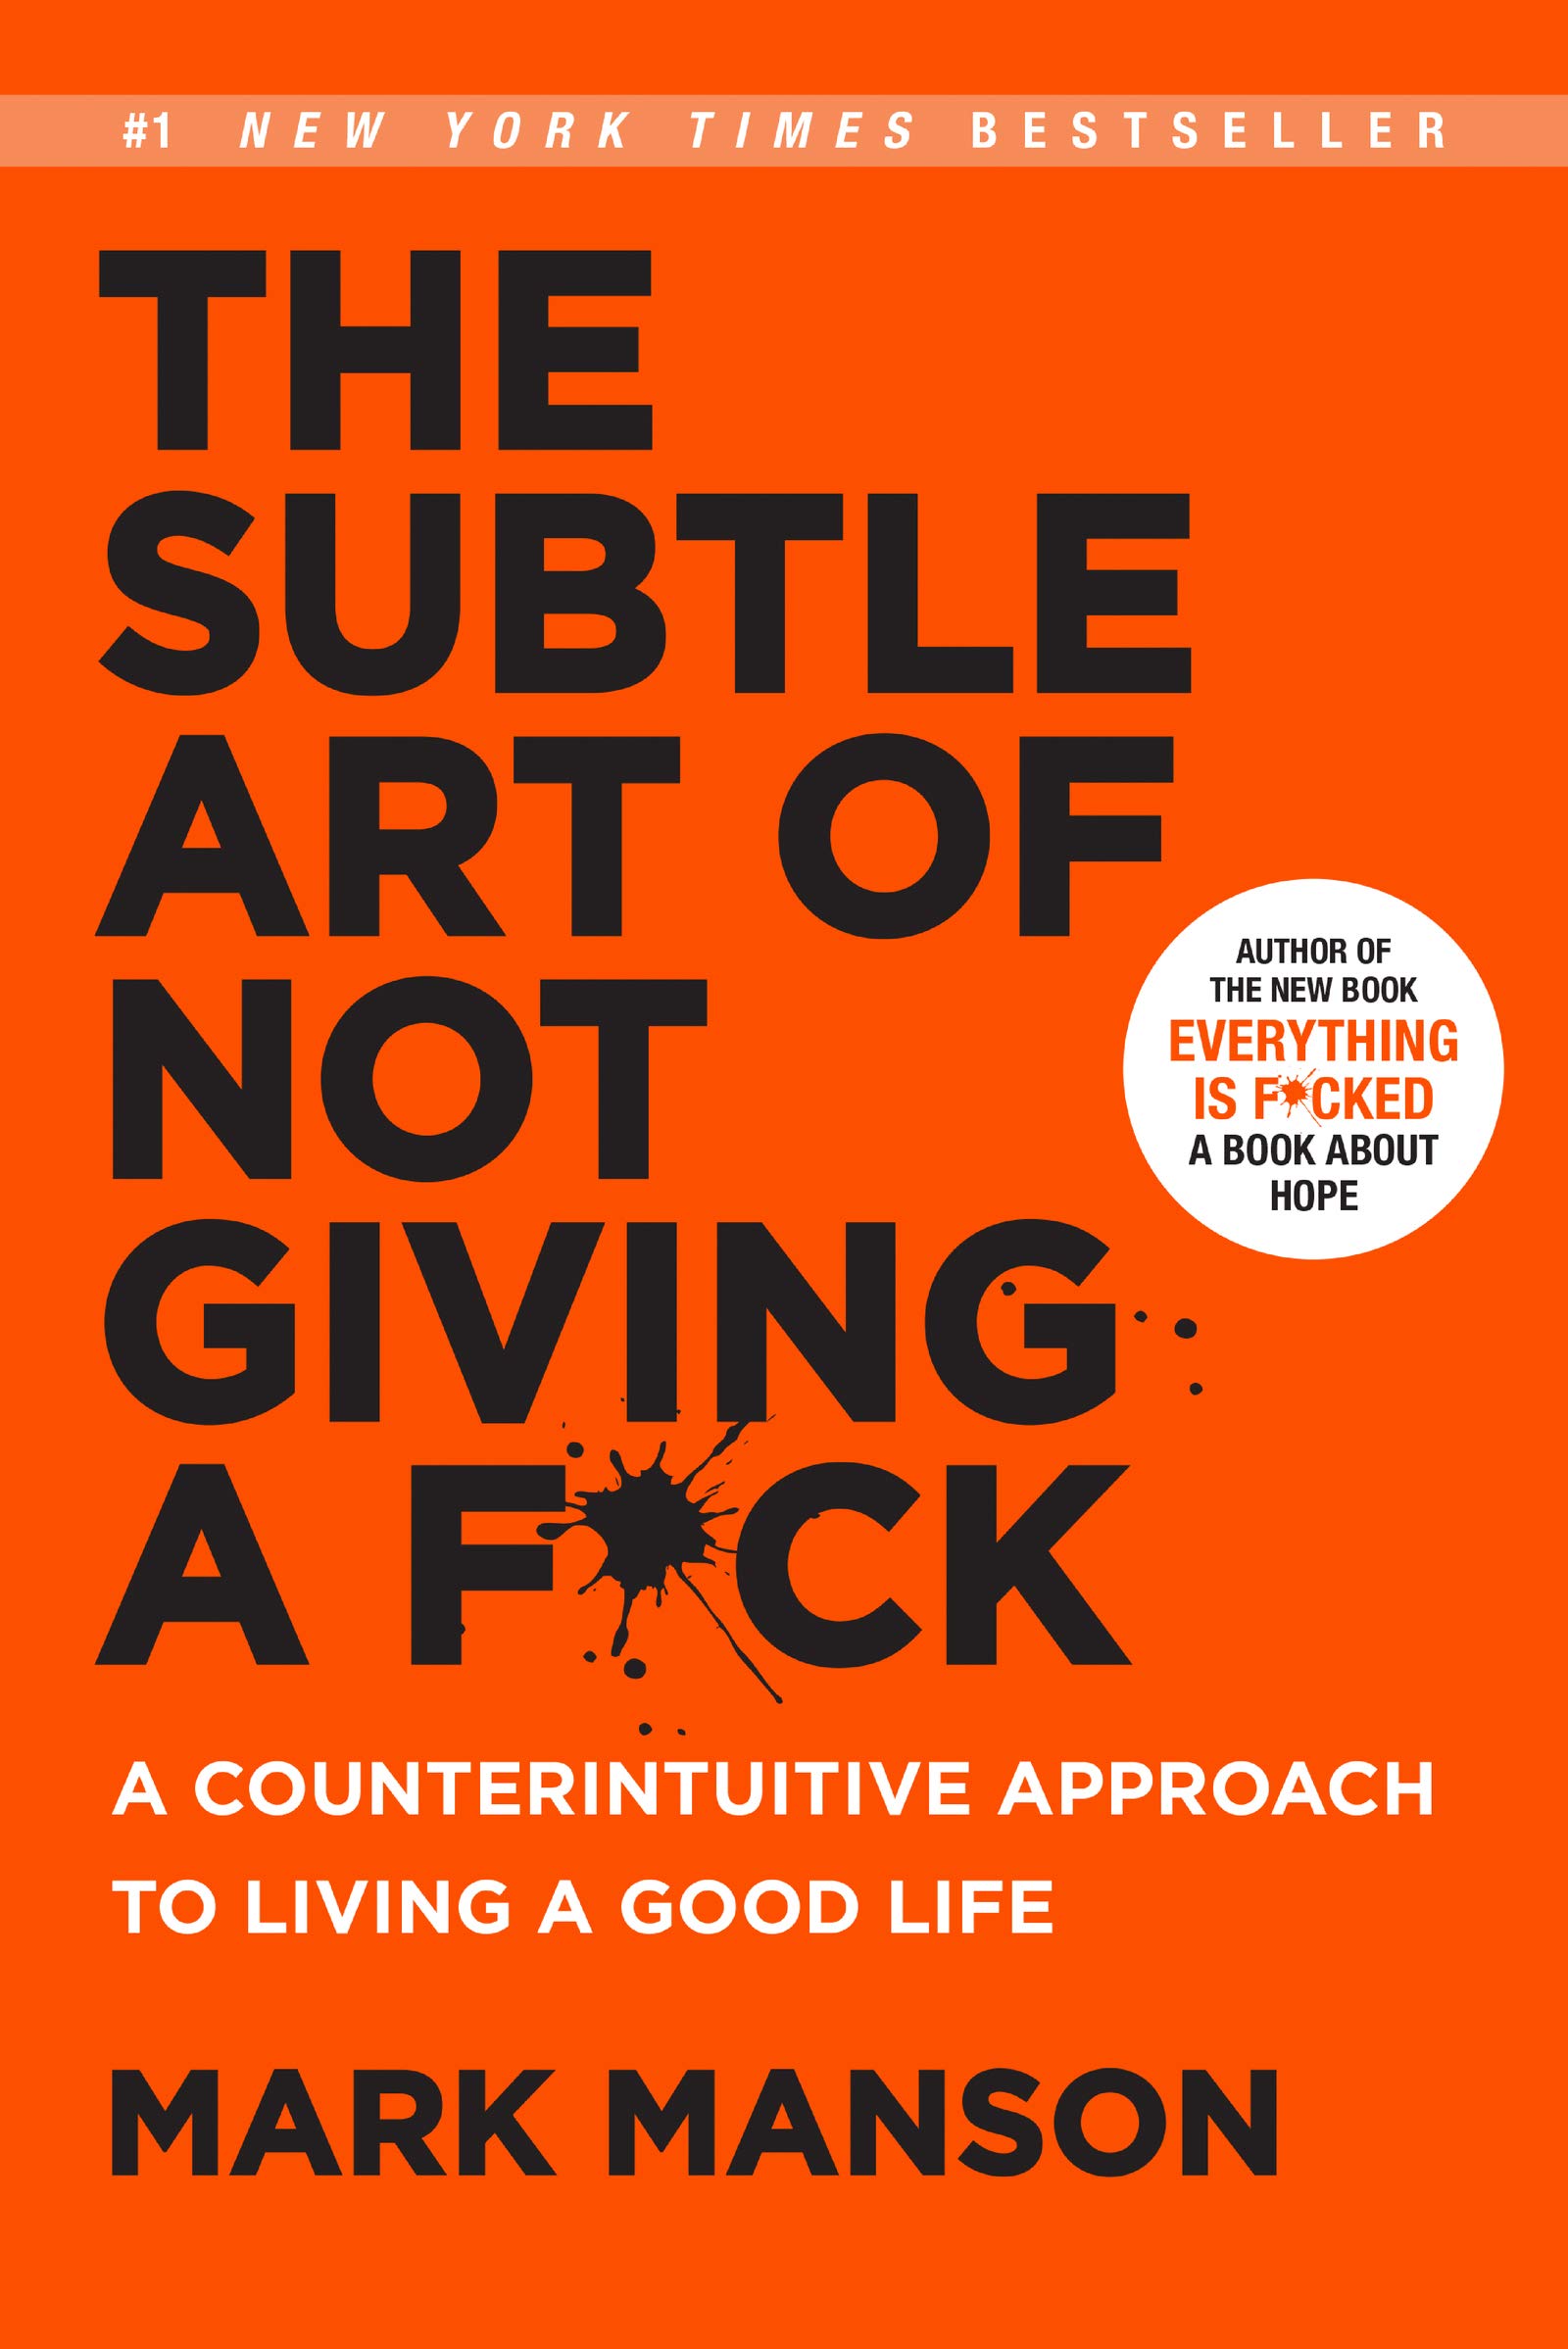 2. 'The Subtle Art of Not Giving a F*ck' by Mark Manson